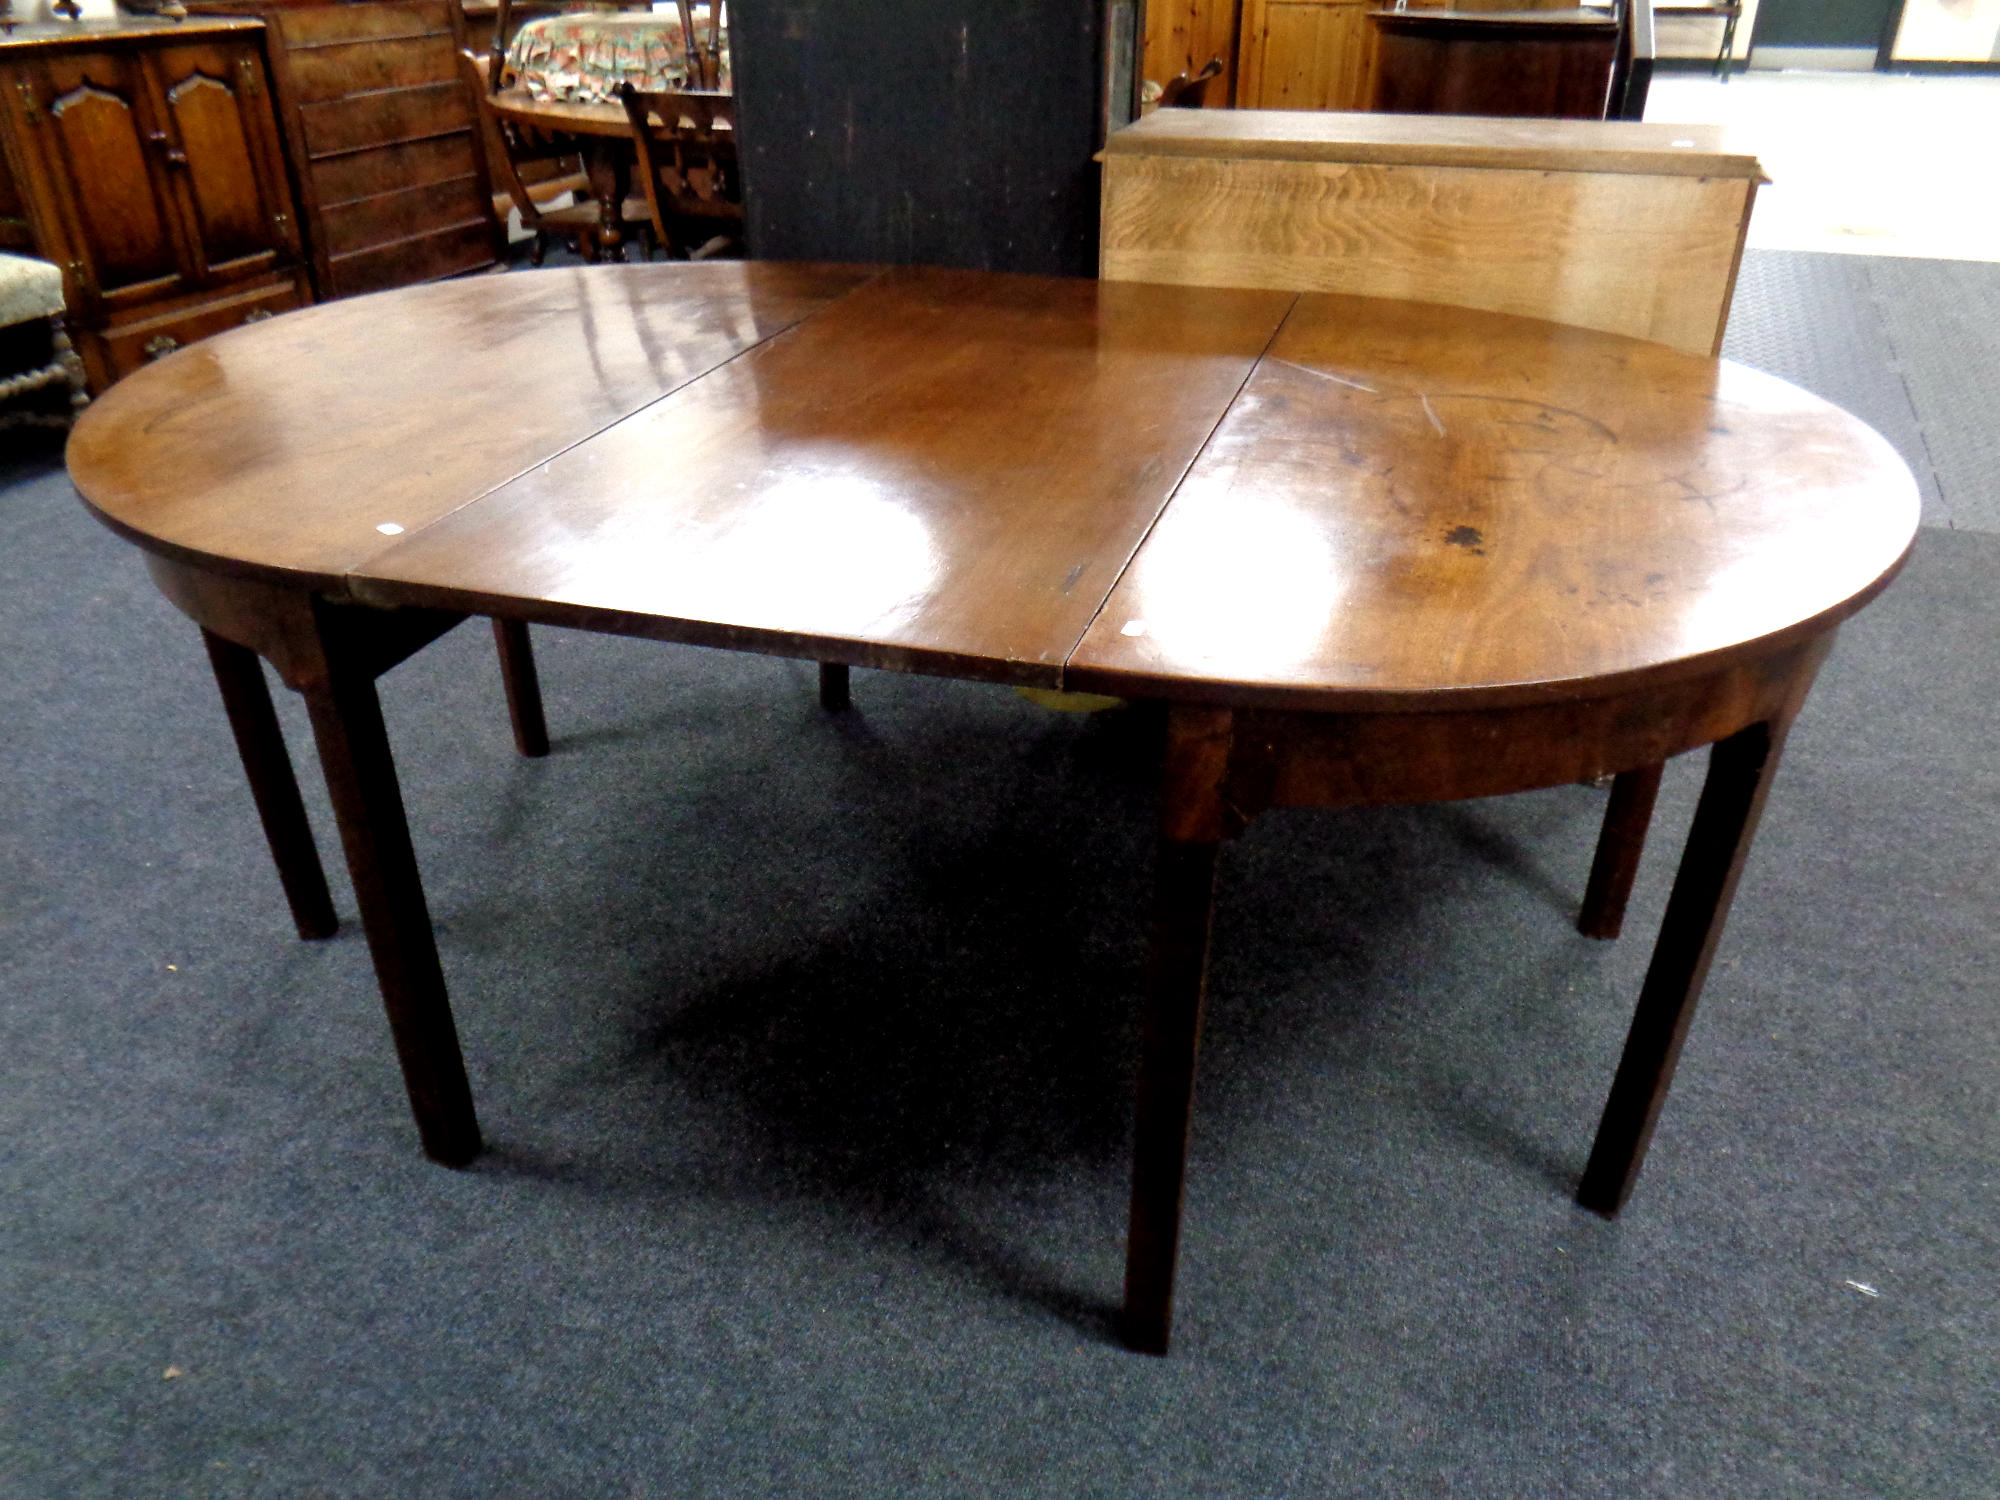 A 19th century mahogany D-end dining table with leaf